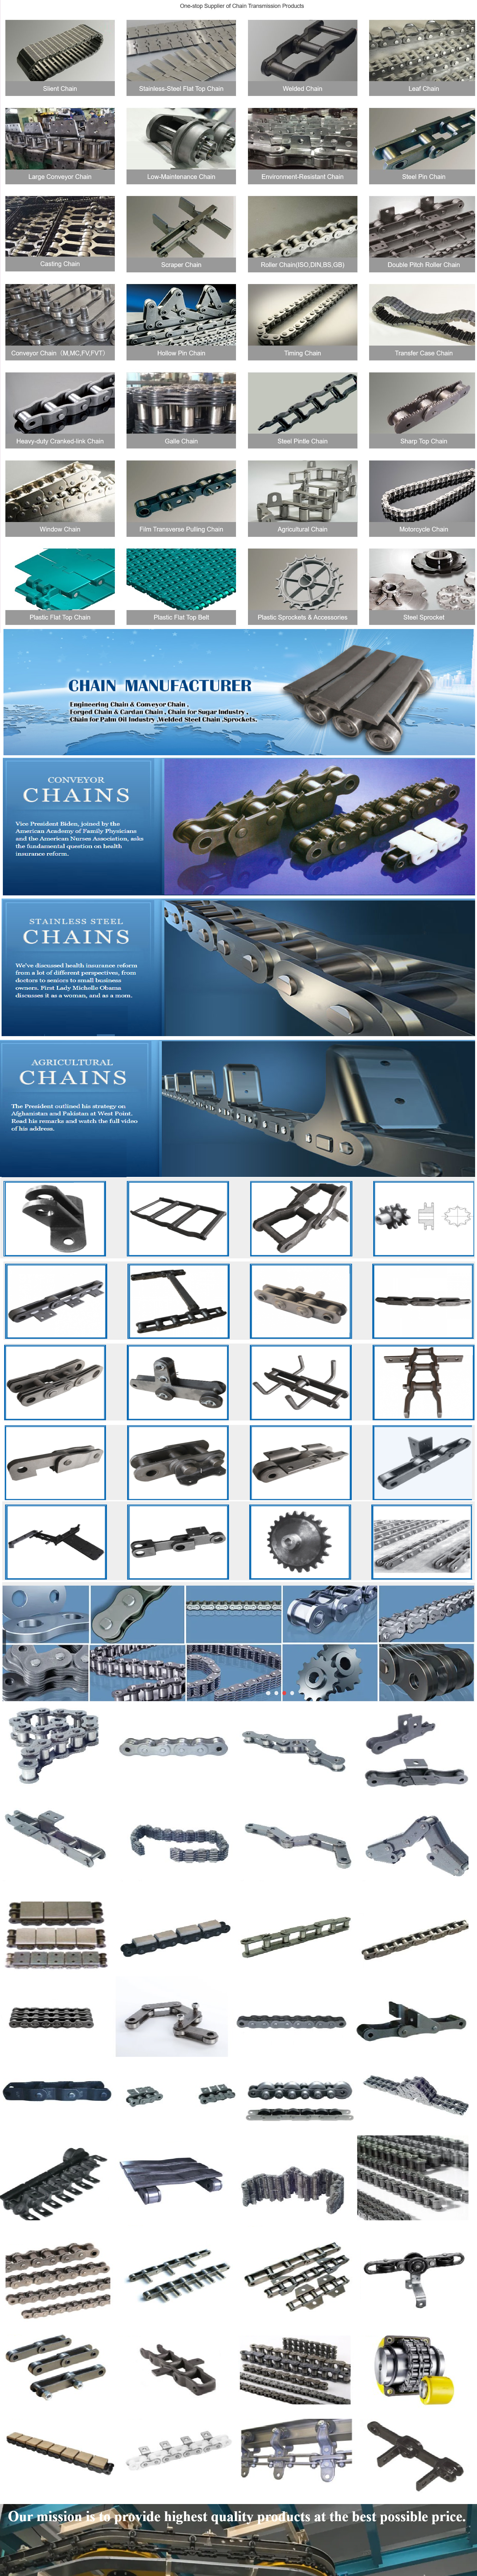 Best  made in China - replacement parts - Chain & sprocket manufacturer : High yfz450r chain roller  in Tyumen Russian Federation  Sensitivity Conveyor Belt Auto Rejector Packed Food Metal Detector with ce certificate top quality low price